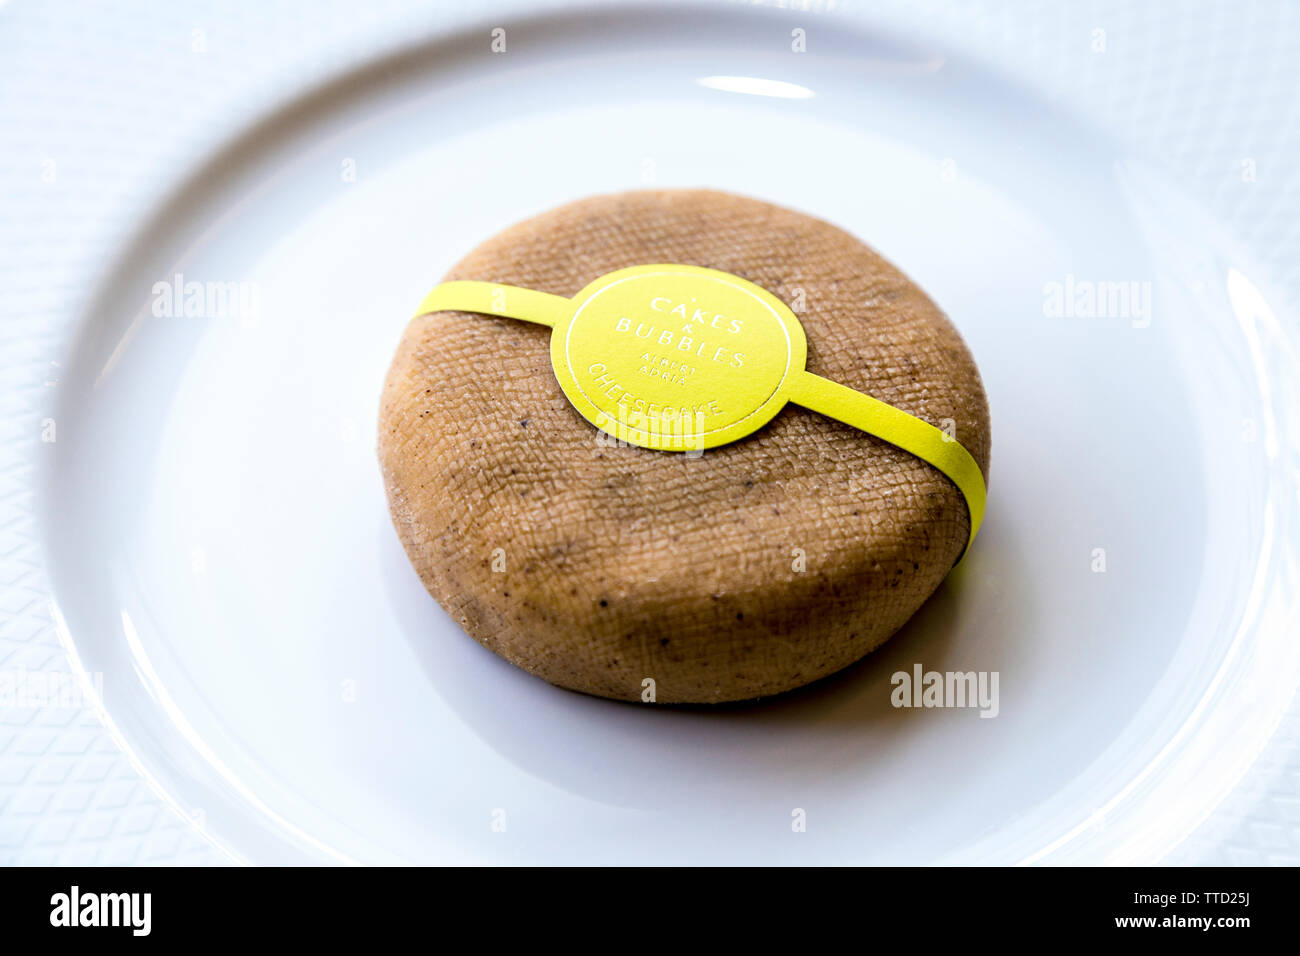 Cheesecake by renowned molecular cuisine chef Albert Adria at Cakes & Bubbles at Cafe Royal, London, UK Stock Photo